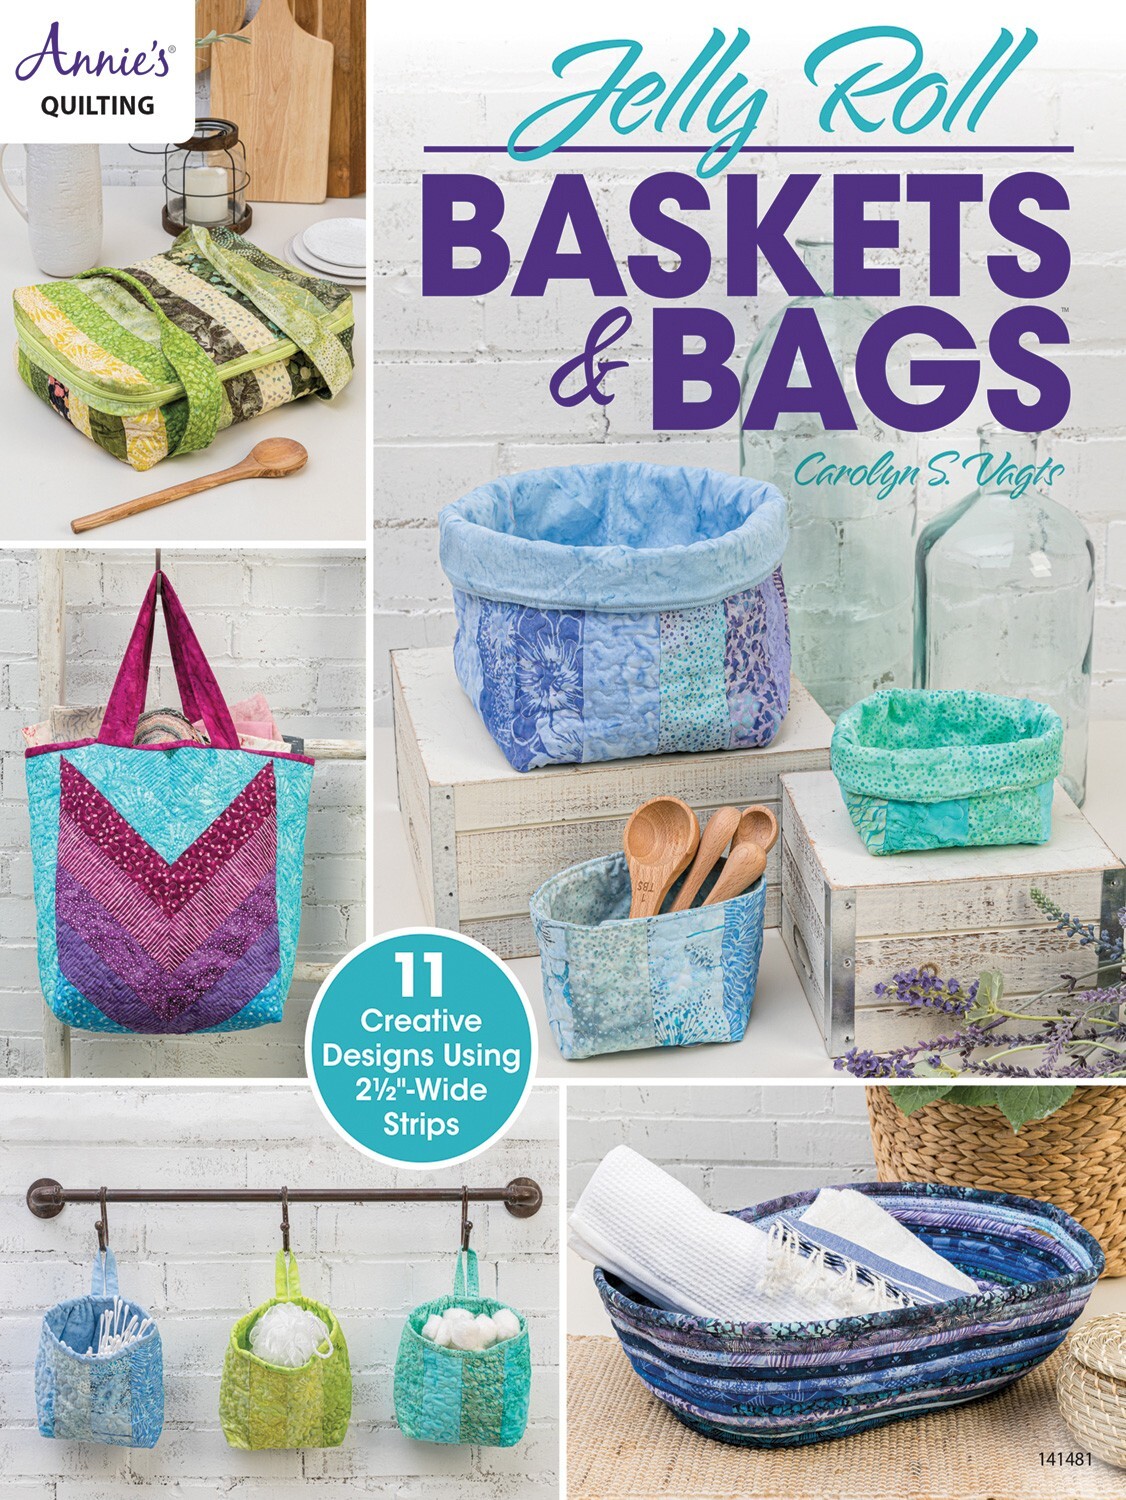 Jelly Rolls Basket and Bags Book 58192